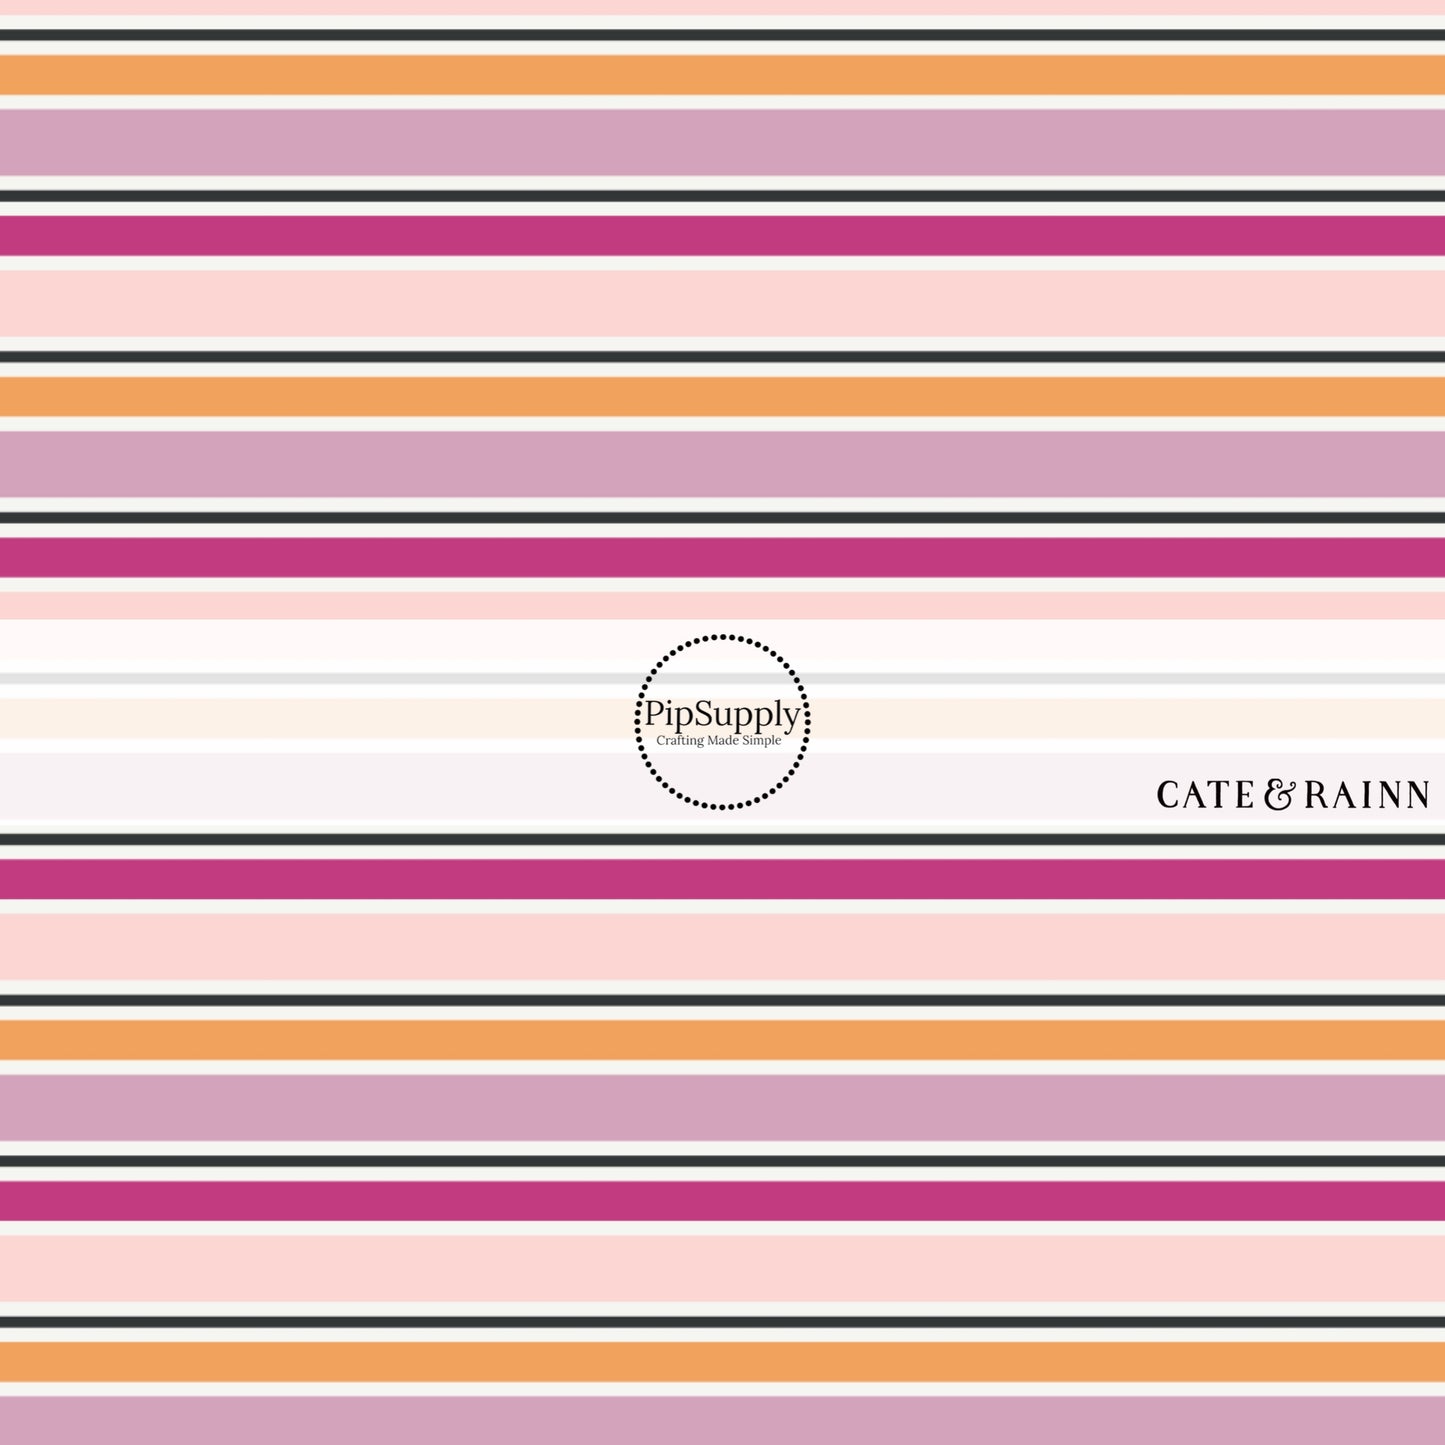 These Halloween stripe themed fabric by the yard features white, light pink, dark pink, black and orange stripes. This fun spooky themed fabric can be used for all your sewing and crafting needs! 